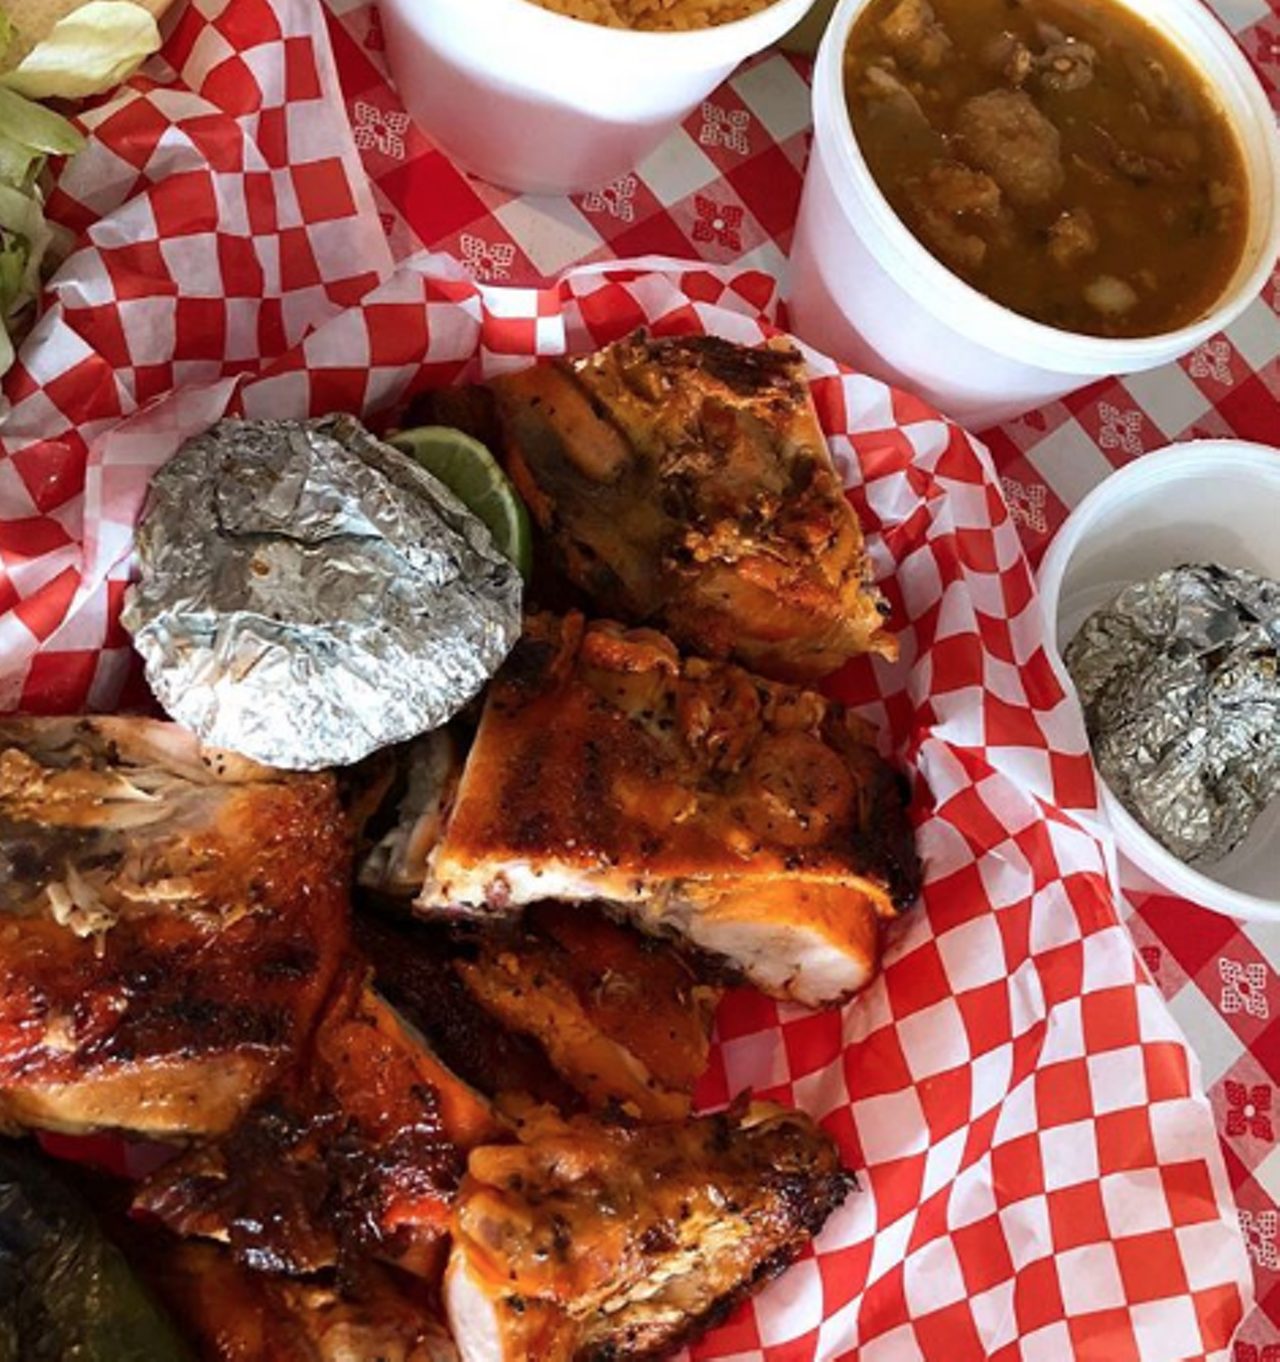 Pollos Asados Los Nortenos
4642 Rigsby Ave, (210) 648-3303, facebook.com
ICYMI, Pollos Asados Los Norteños temporarily closed for seven months while trying to lessen their smoke footprint to the neighborhood. They’re back and better than ever.
Photo via Instagram / jesselizarraras